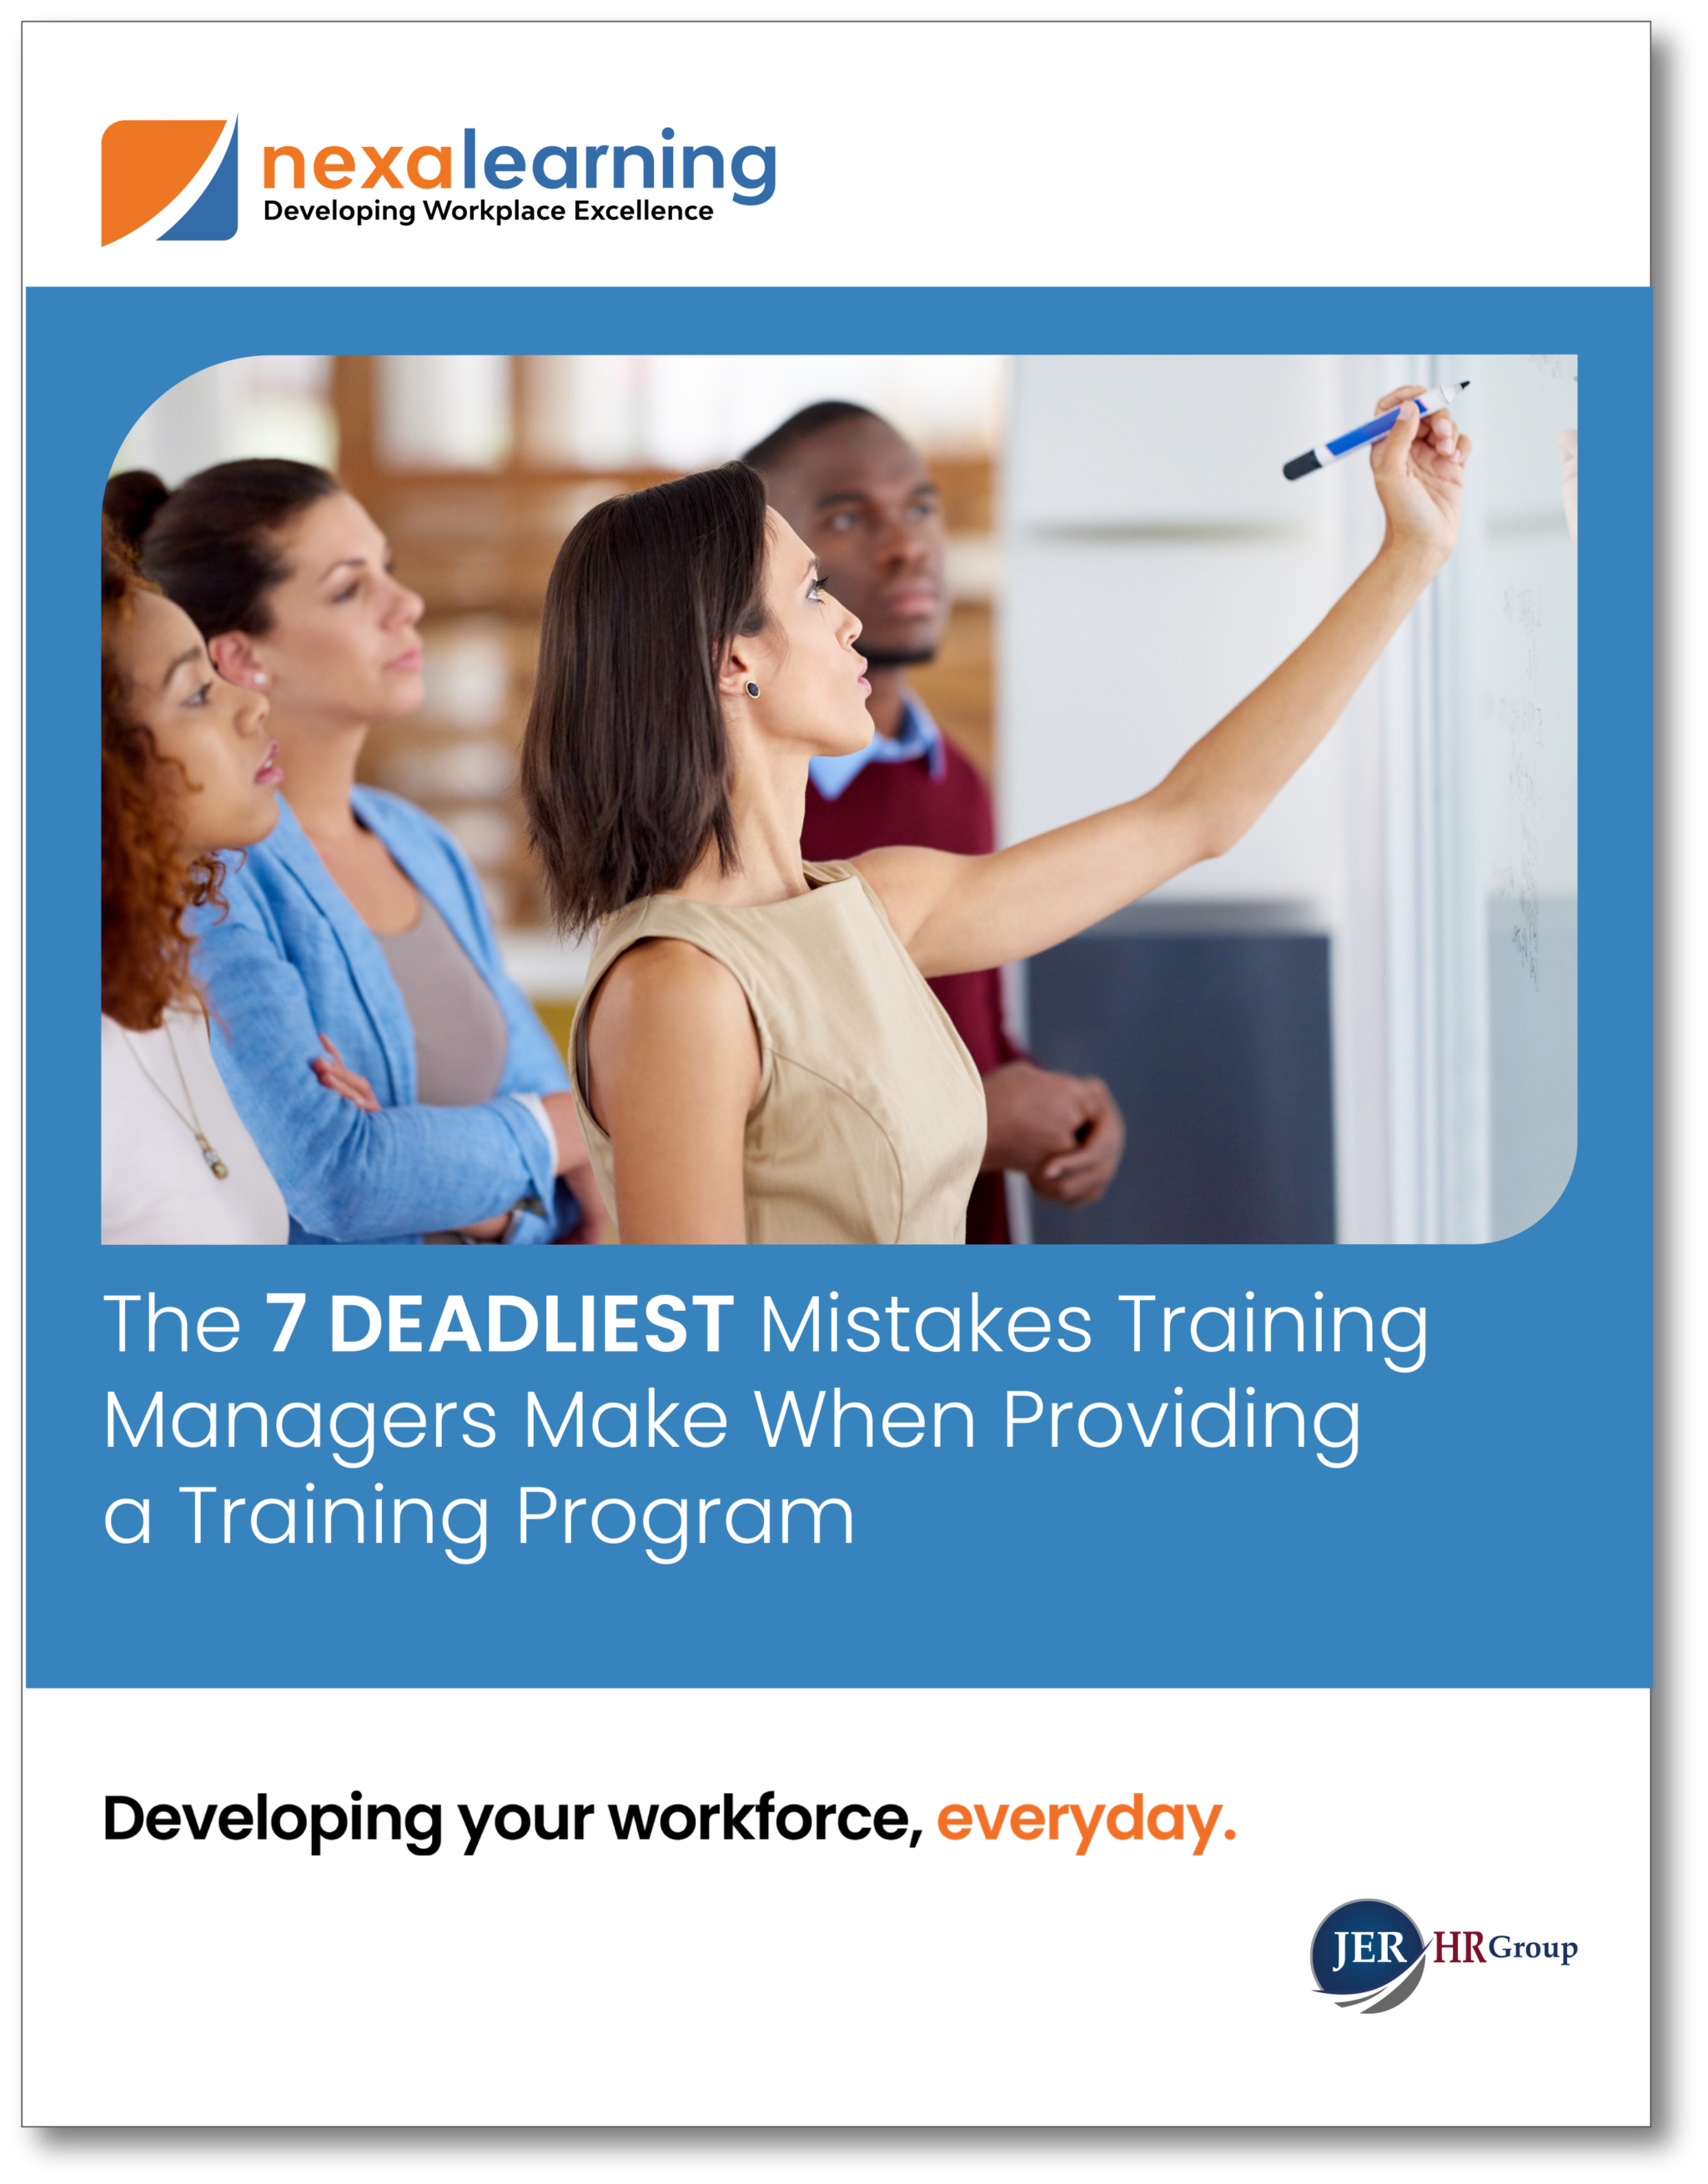 The 7 DEADLIEST Mistakes Training Managers Make When Providing a Training Program